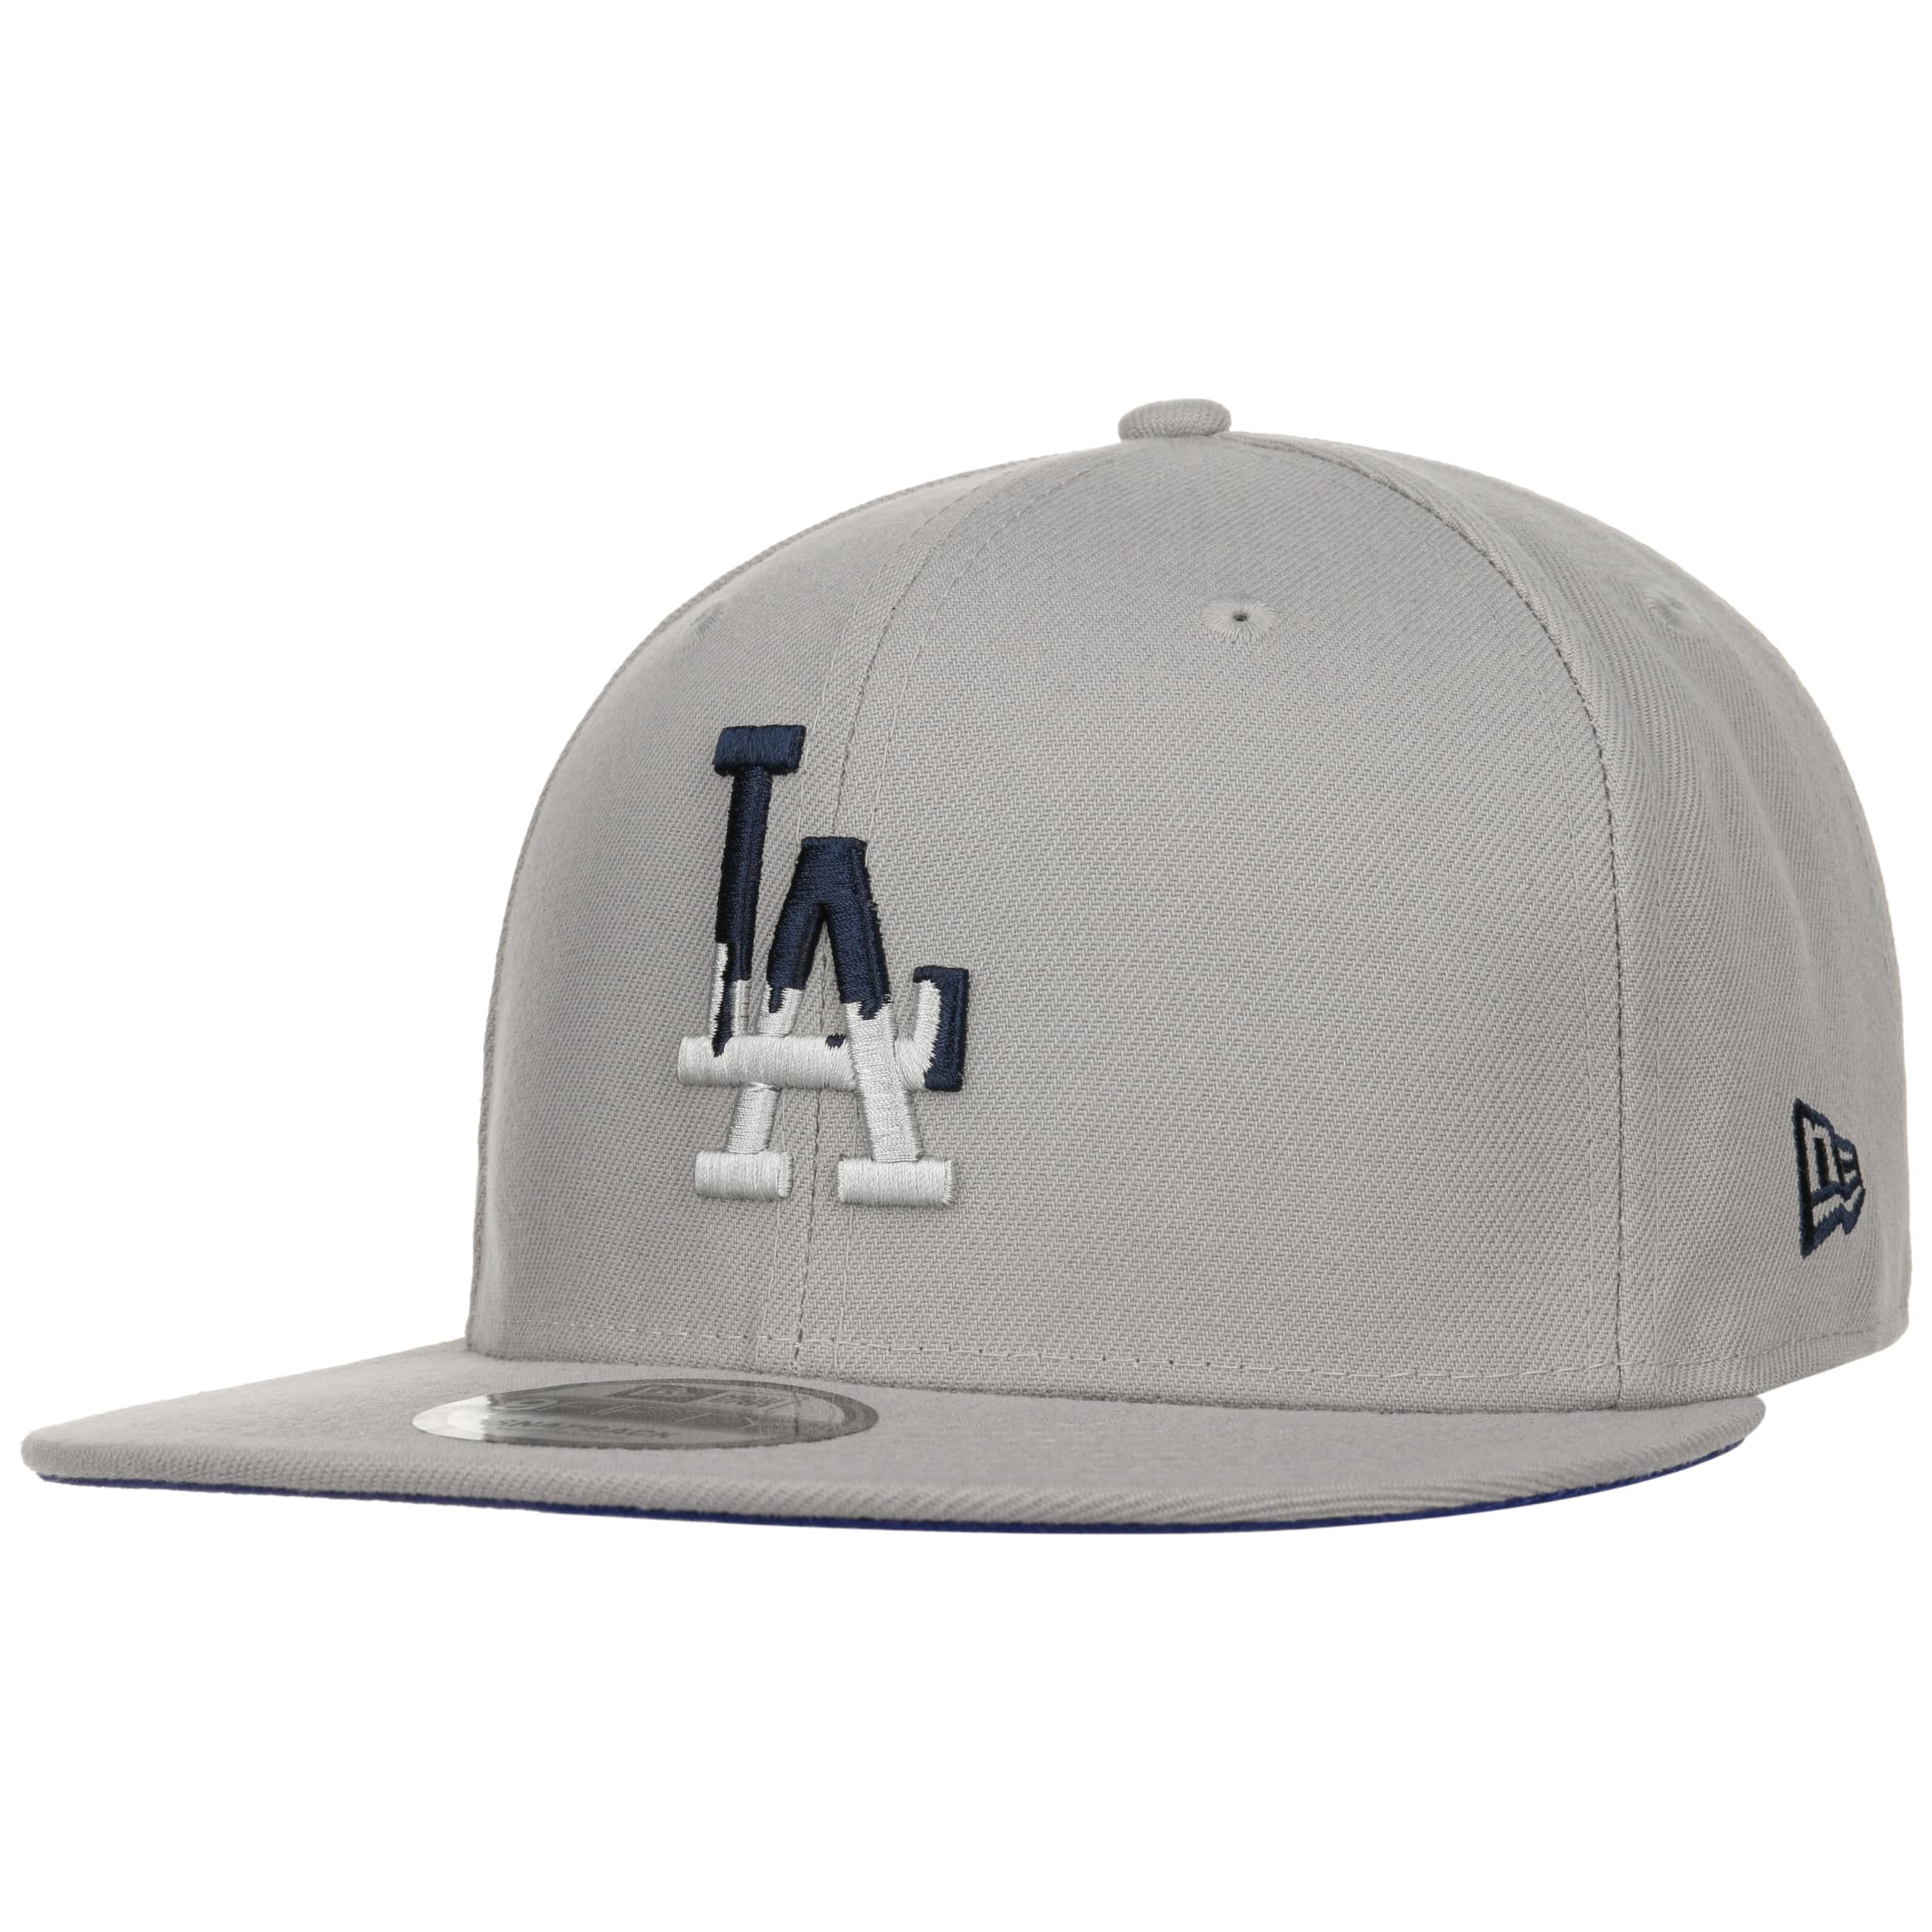 NEW ERA: BAGS AND ACCESSORIES, NEW ERA LOS ANGELES DODGERS HAT